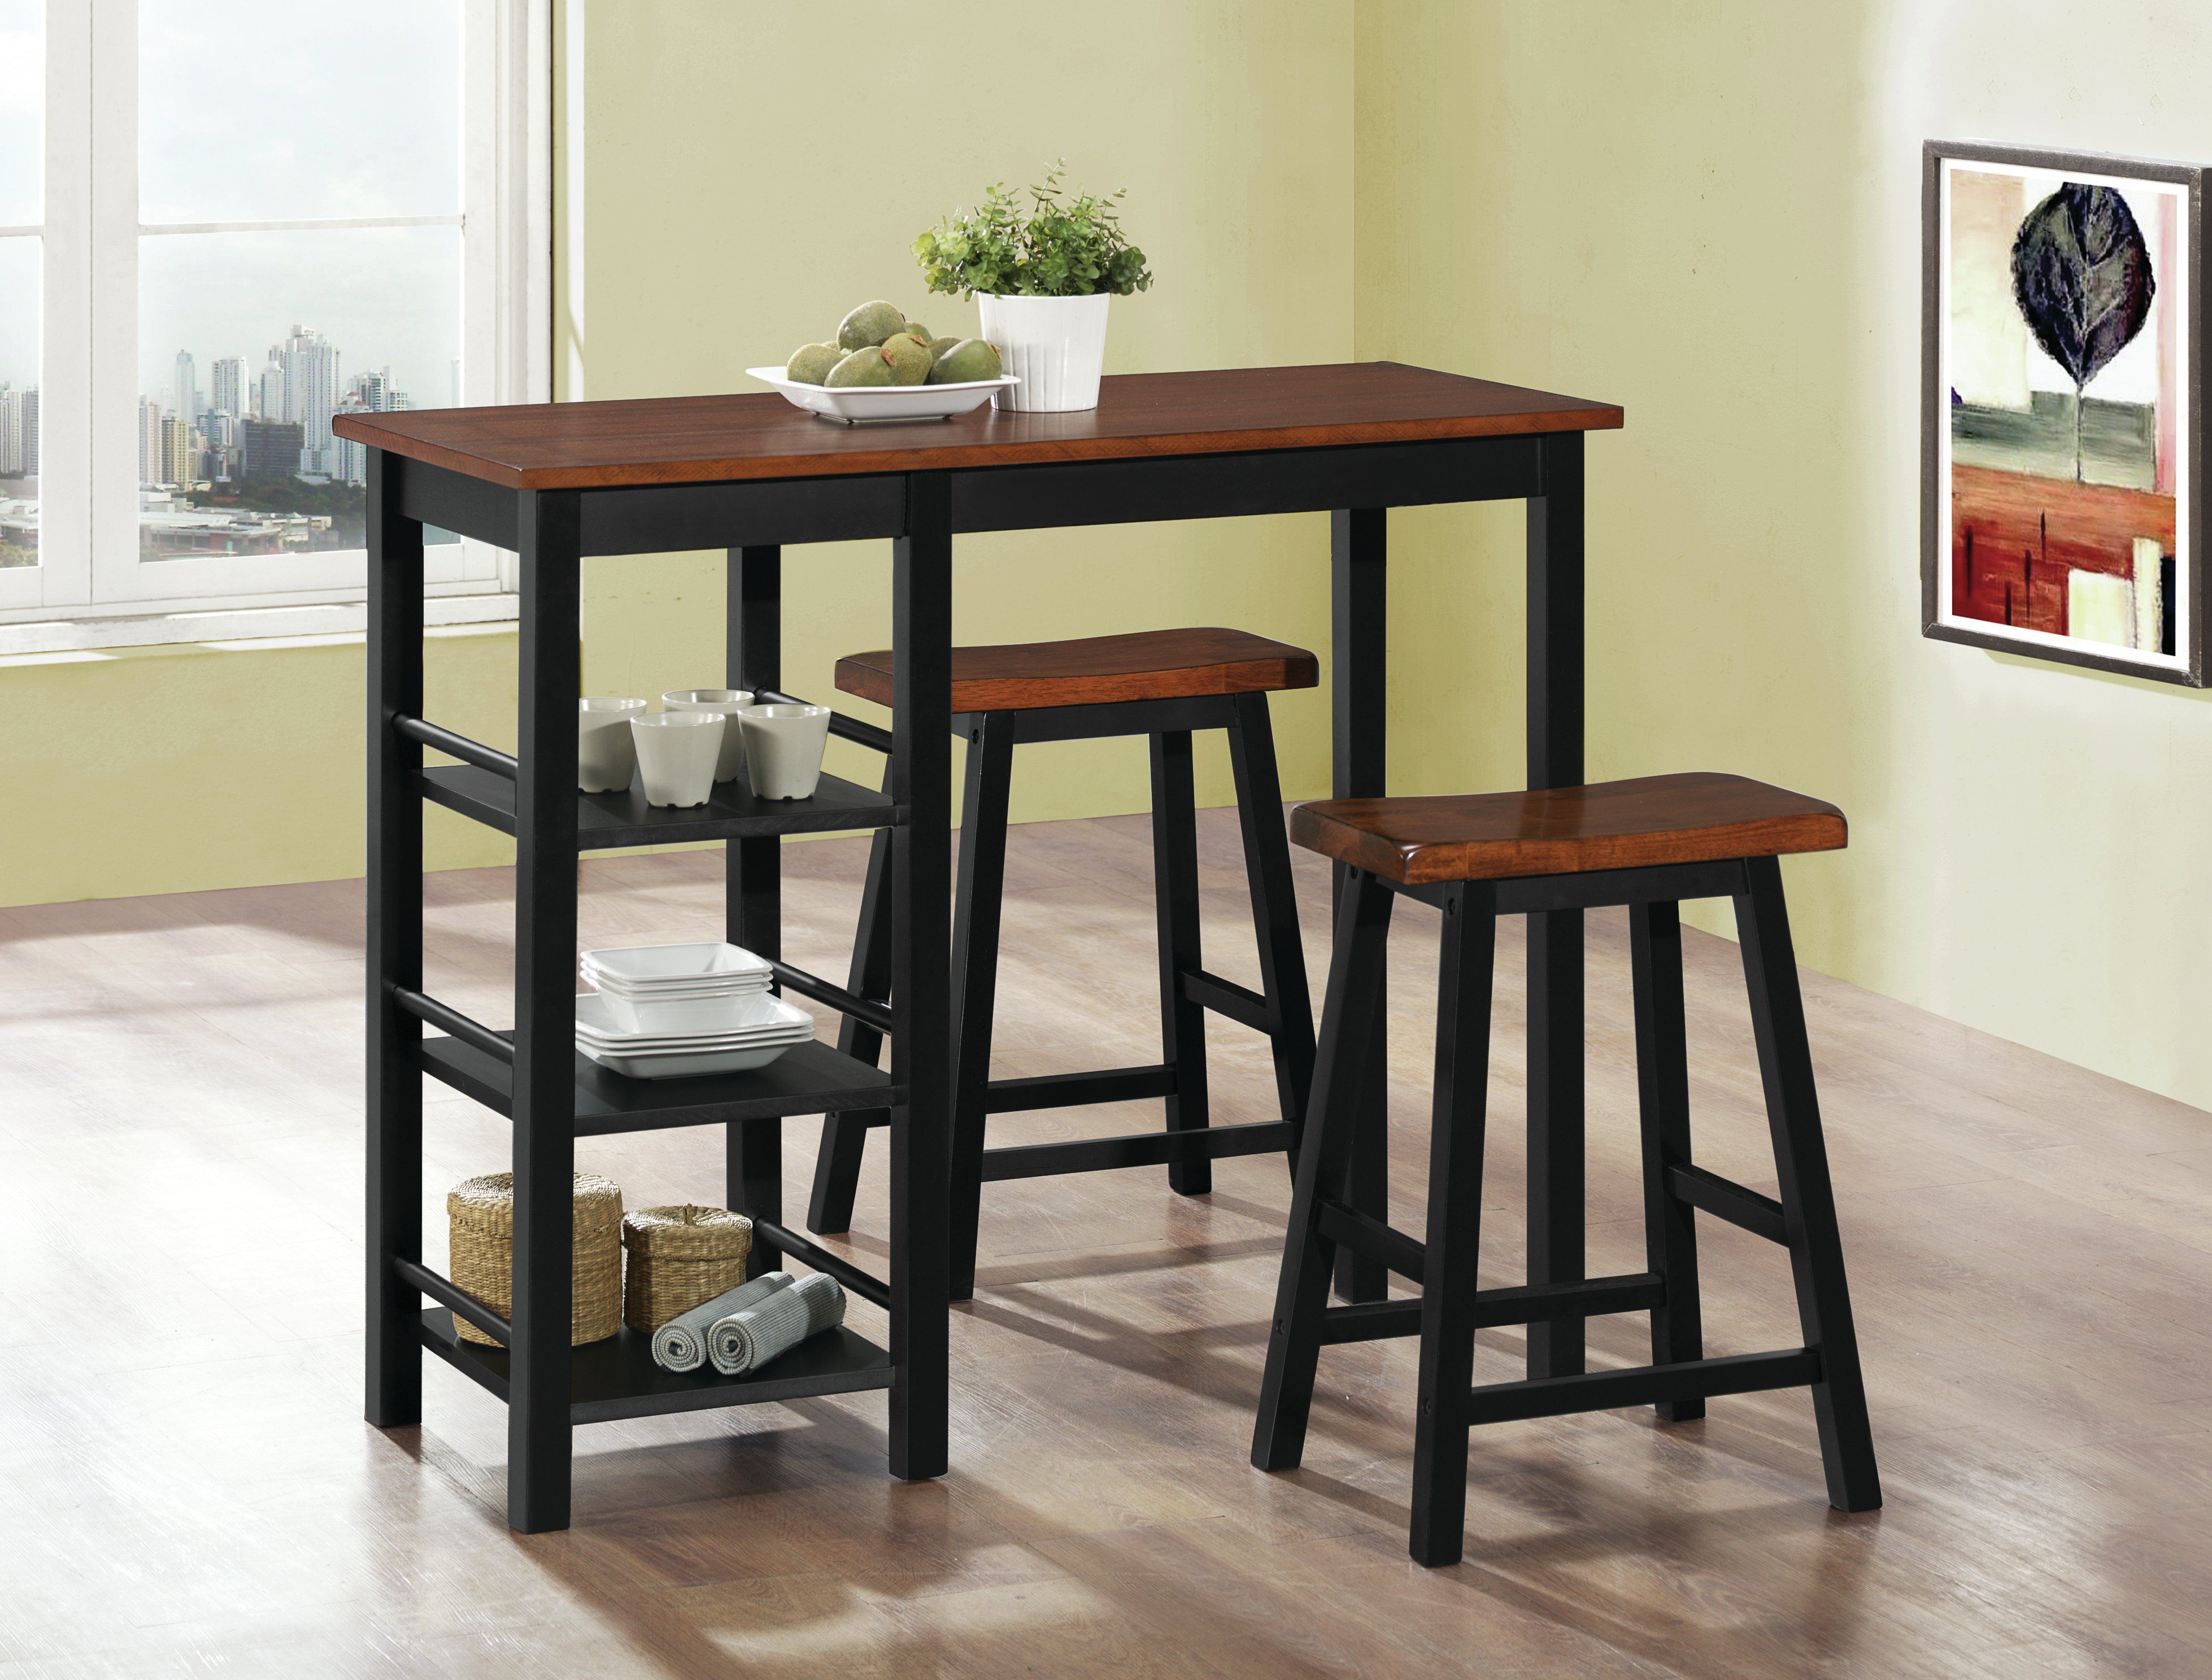 Berrios 3 Piece Counter Height Dining Set In Most Recently Released Tenney 3 Piece Counter Height Dining Sets (View 5 of 20)